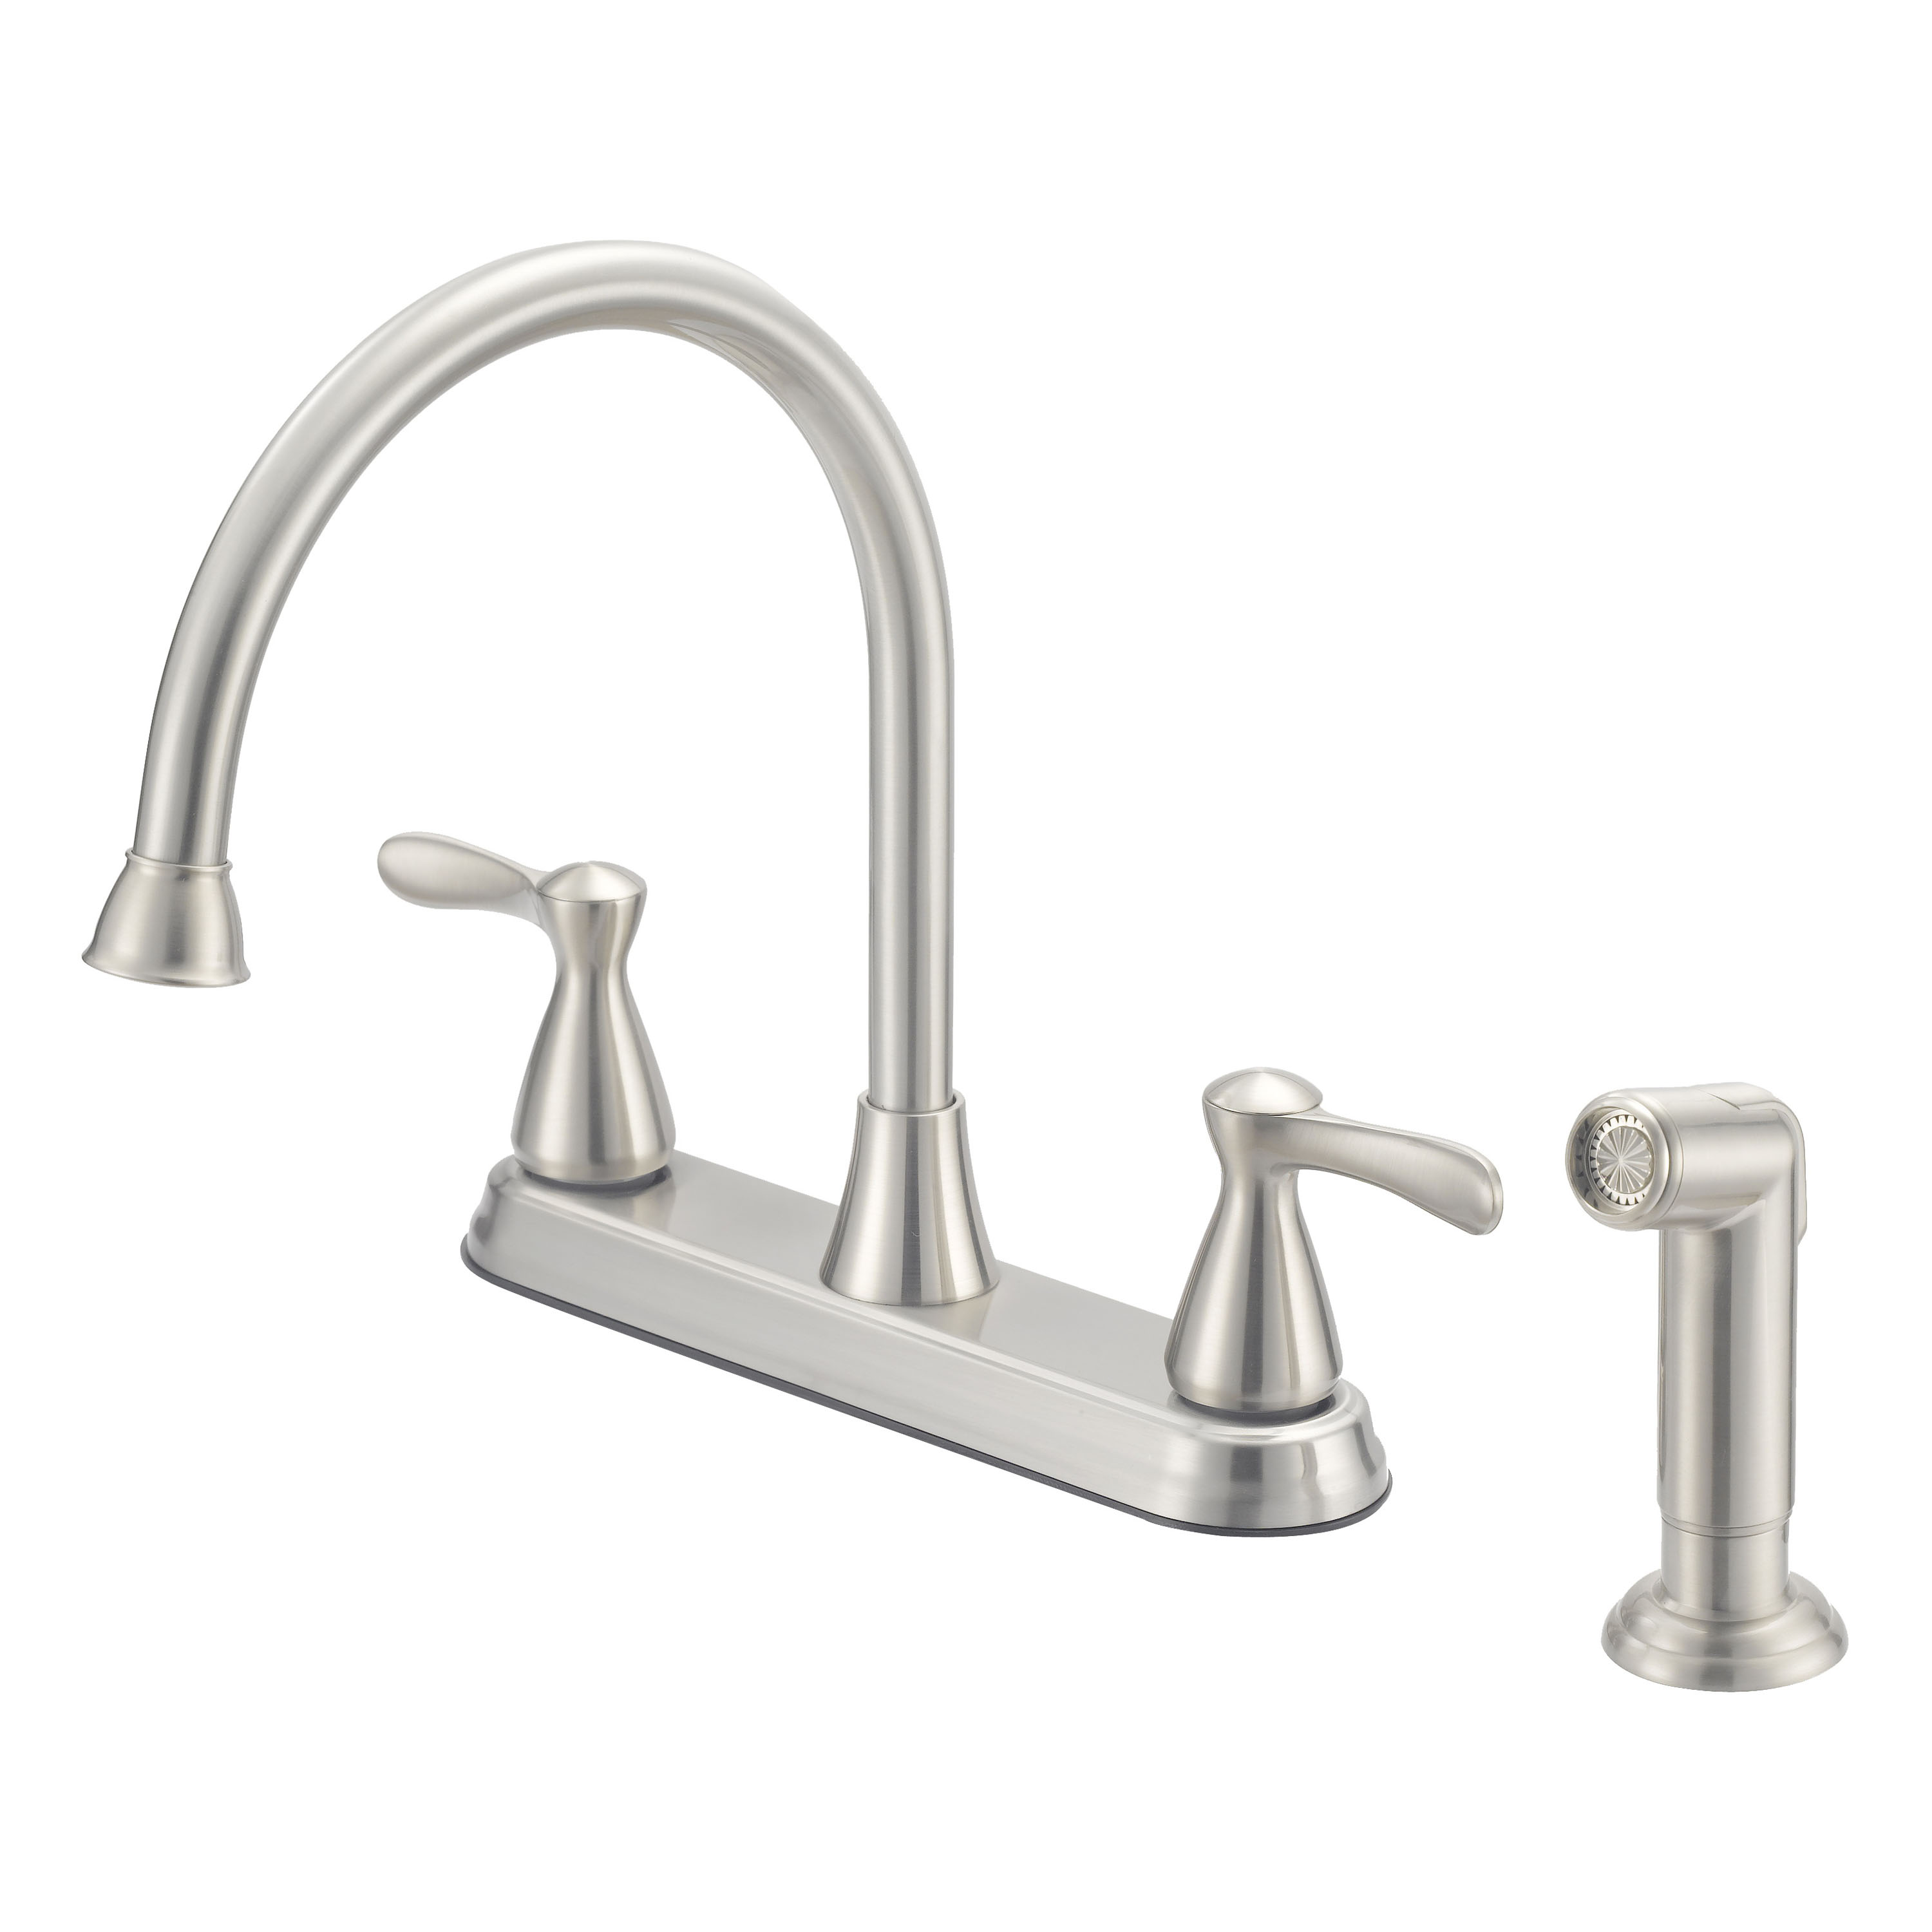 Boston Harbor F8210001NP Kitchen Faucet, 1.8 gpm, 4-Faucet Hole, Metal/Plastic, Stainless Steel, Deck Mounting